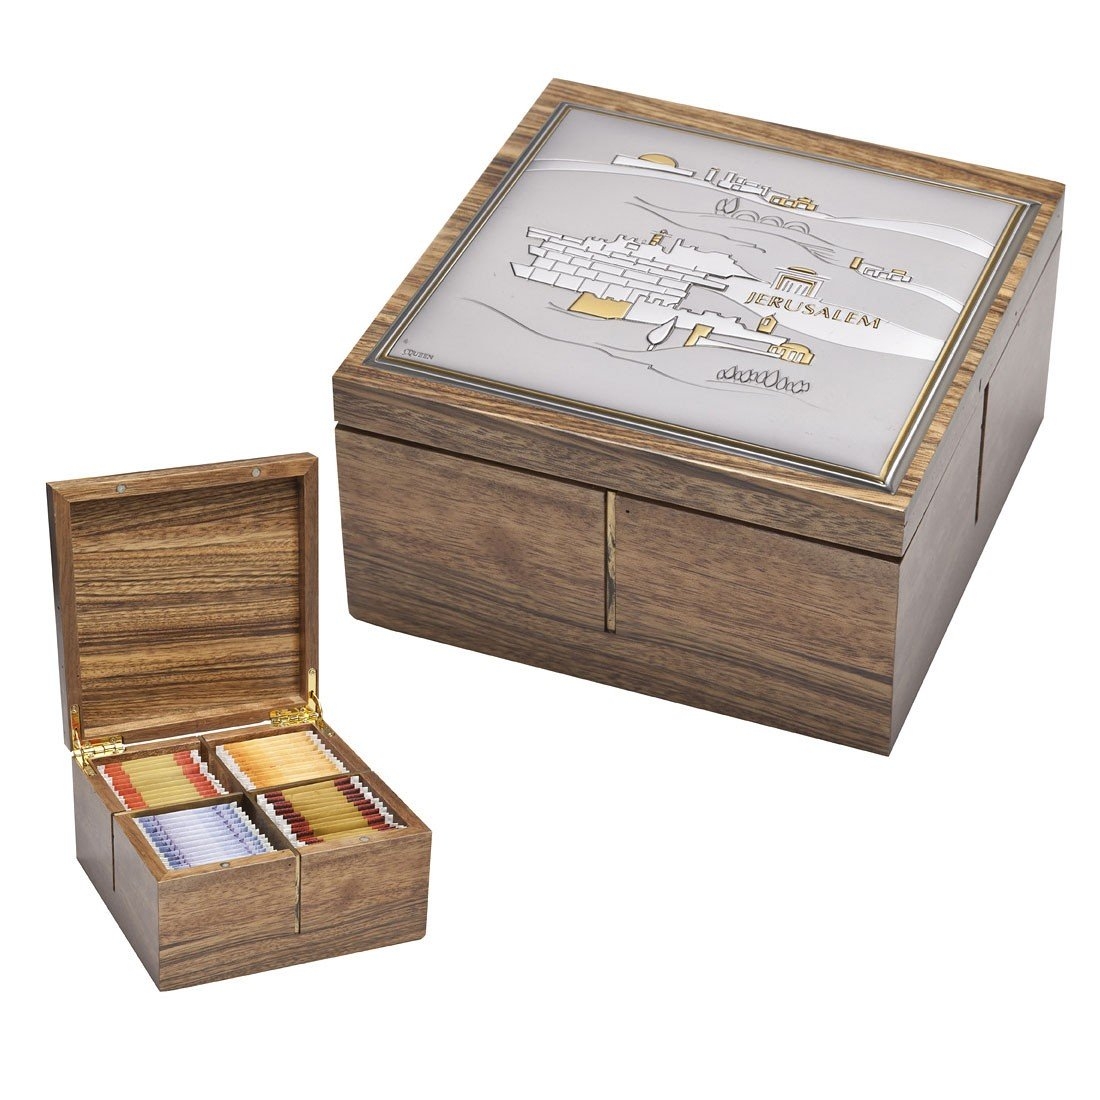 Exclusive 925 Sterling Silver-Plated and Walnut Wood Jerusalem View Tea Box - 1